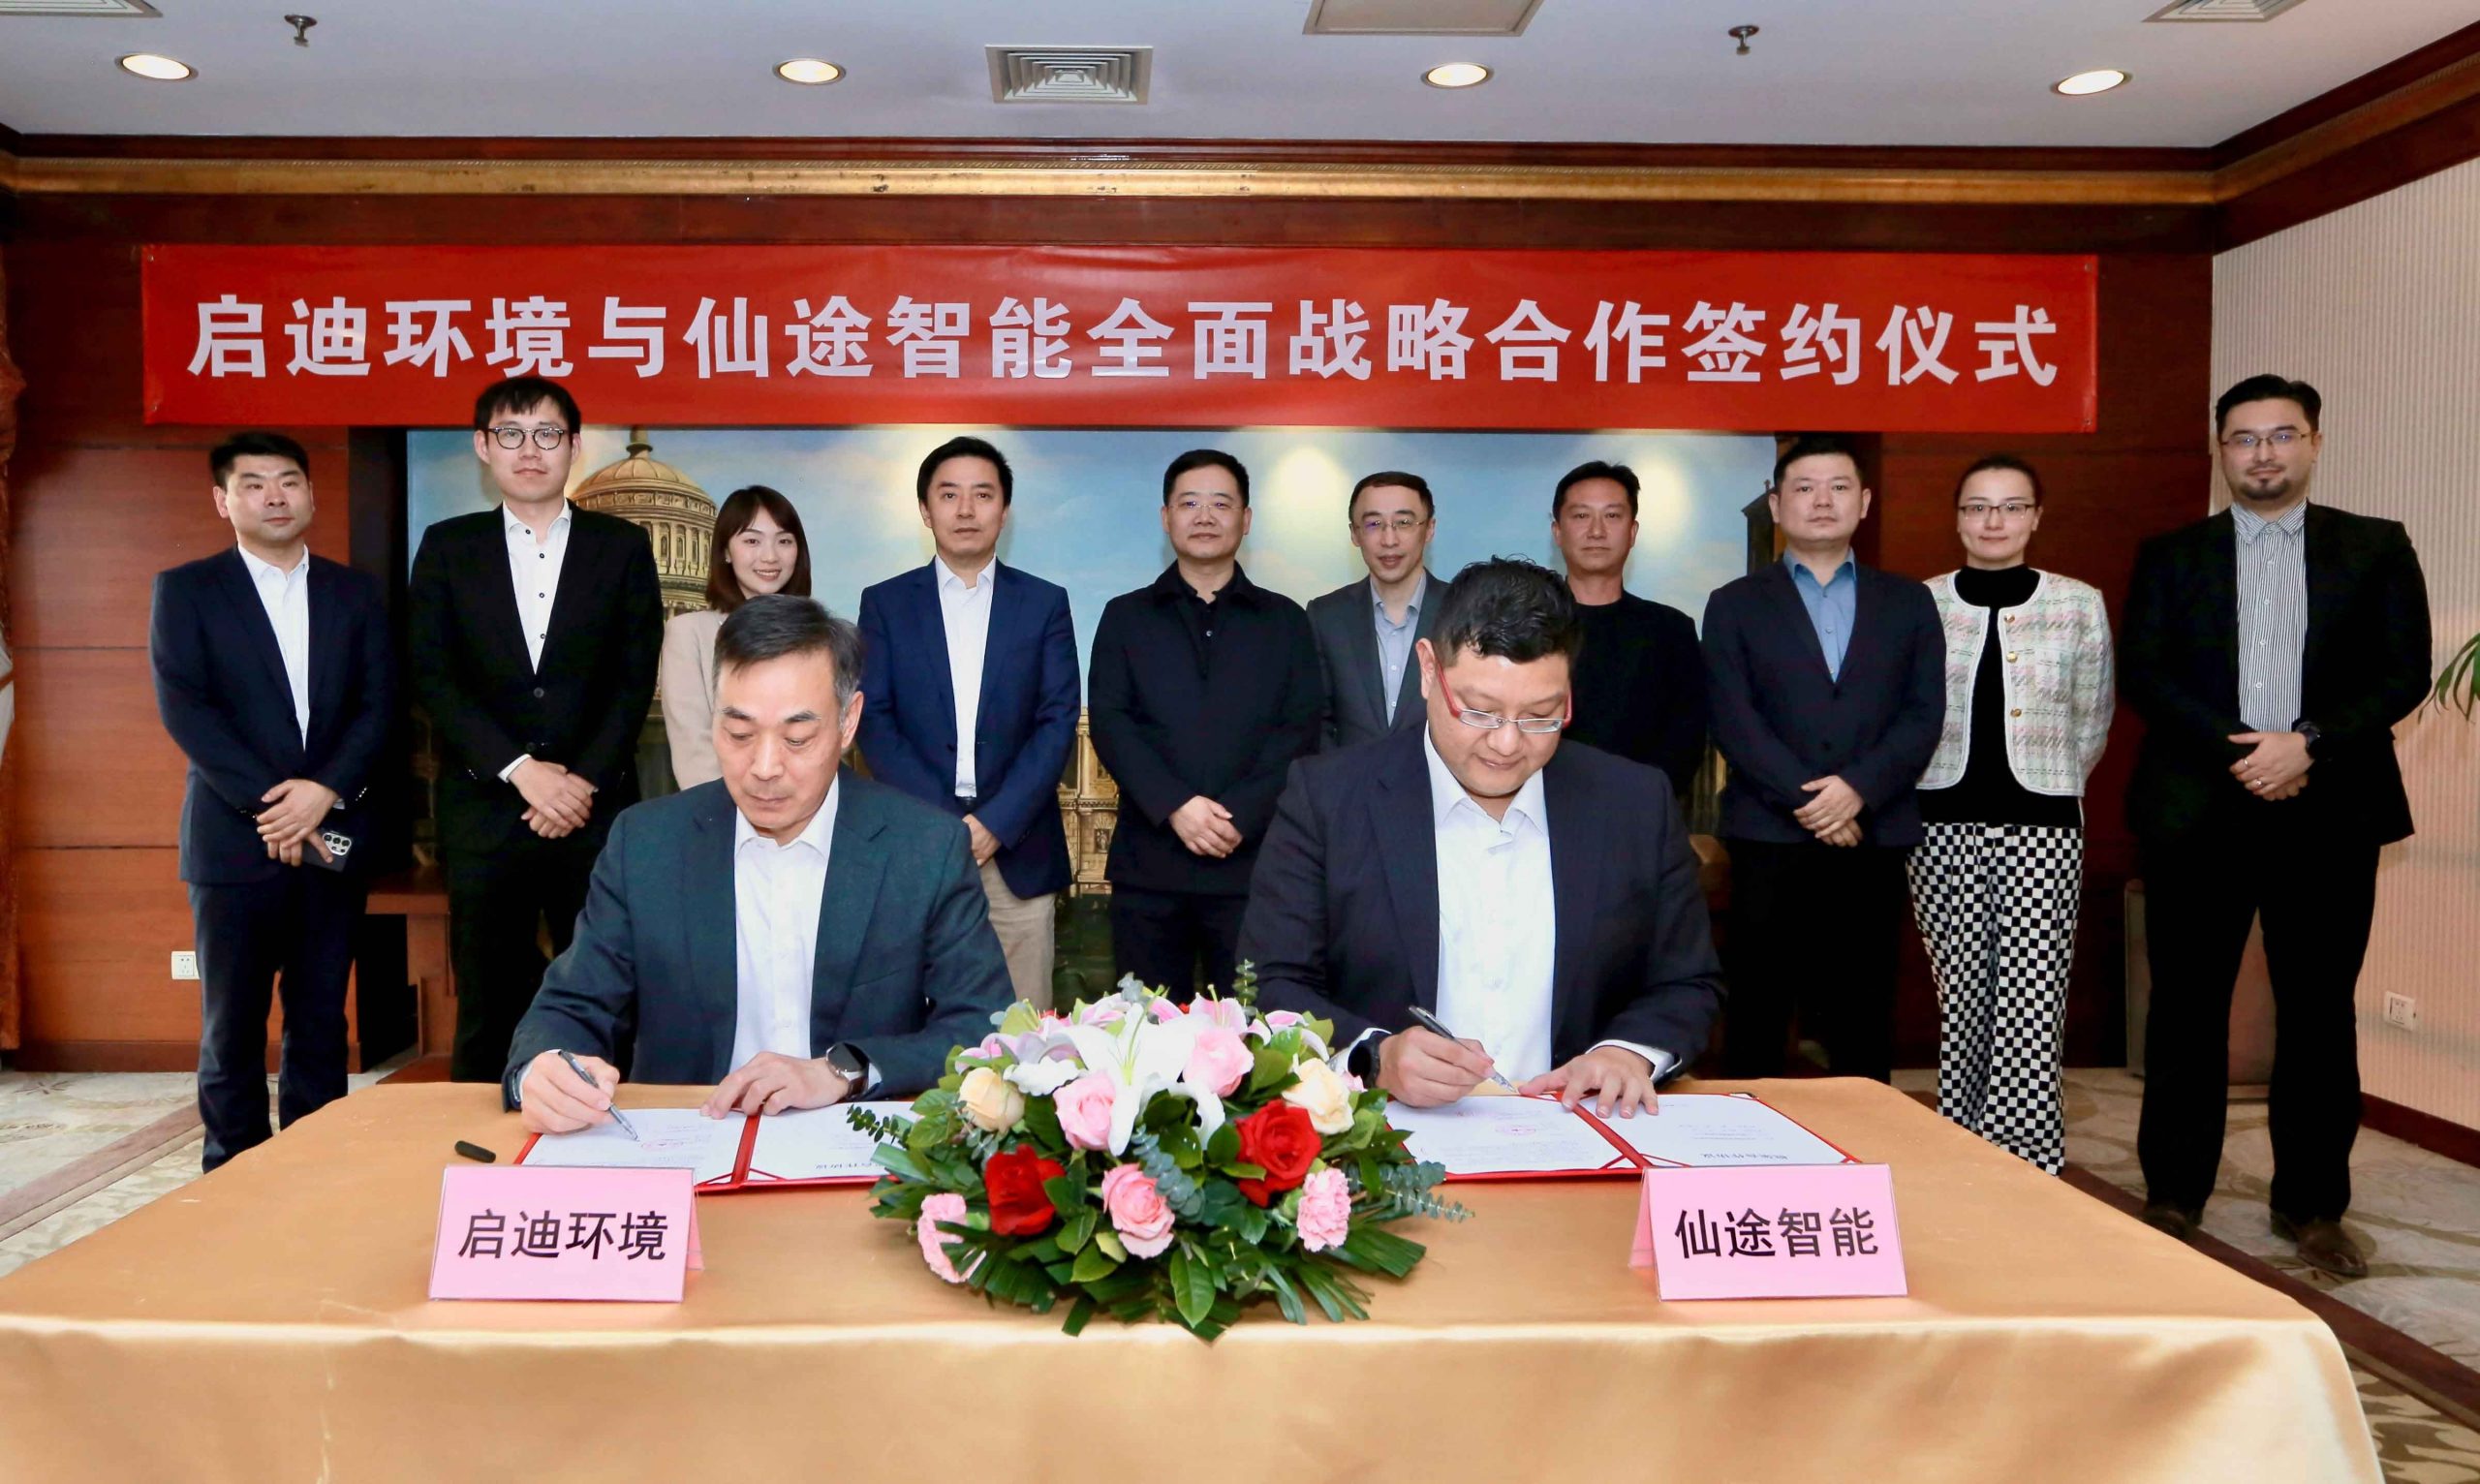 Autowise.ai and TUS-EST sign comprehensive strategic cooperation agreement to jointly create new productivity for urban development